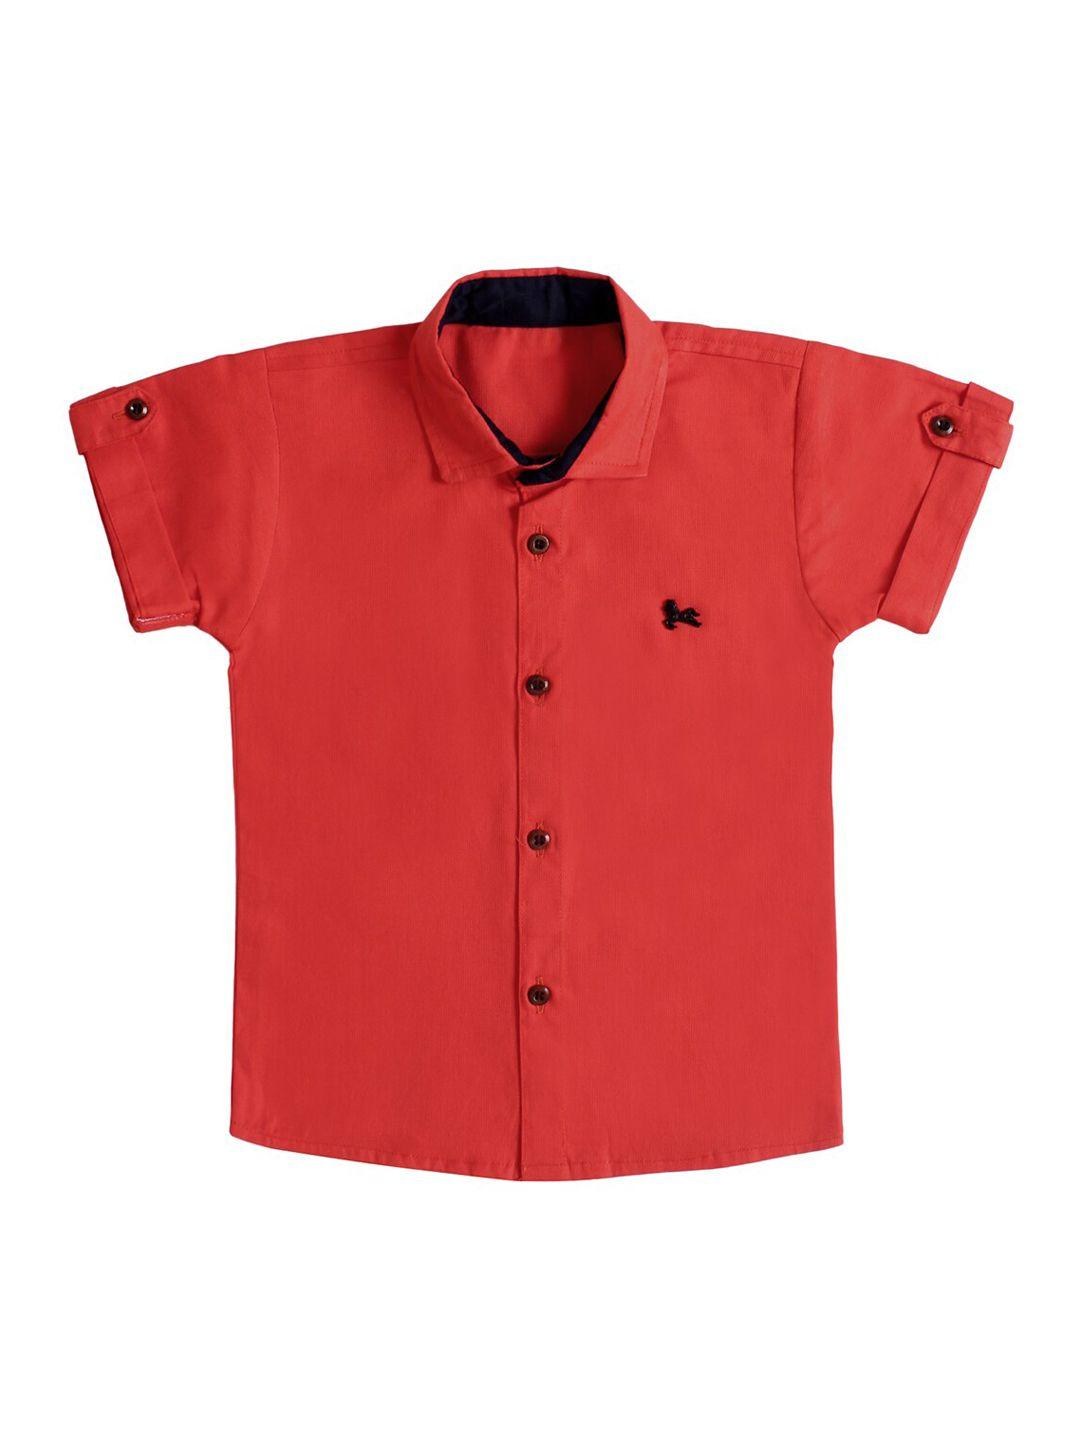 superminis boys red solid cotton casual shirt